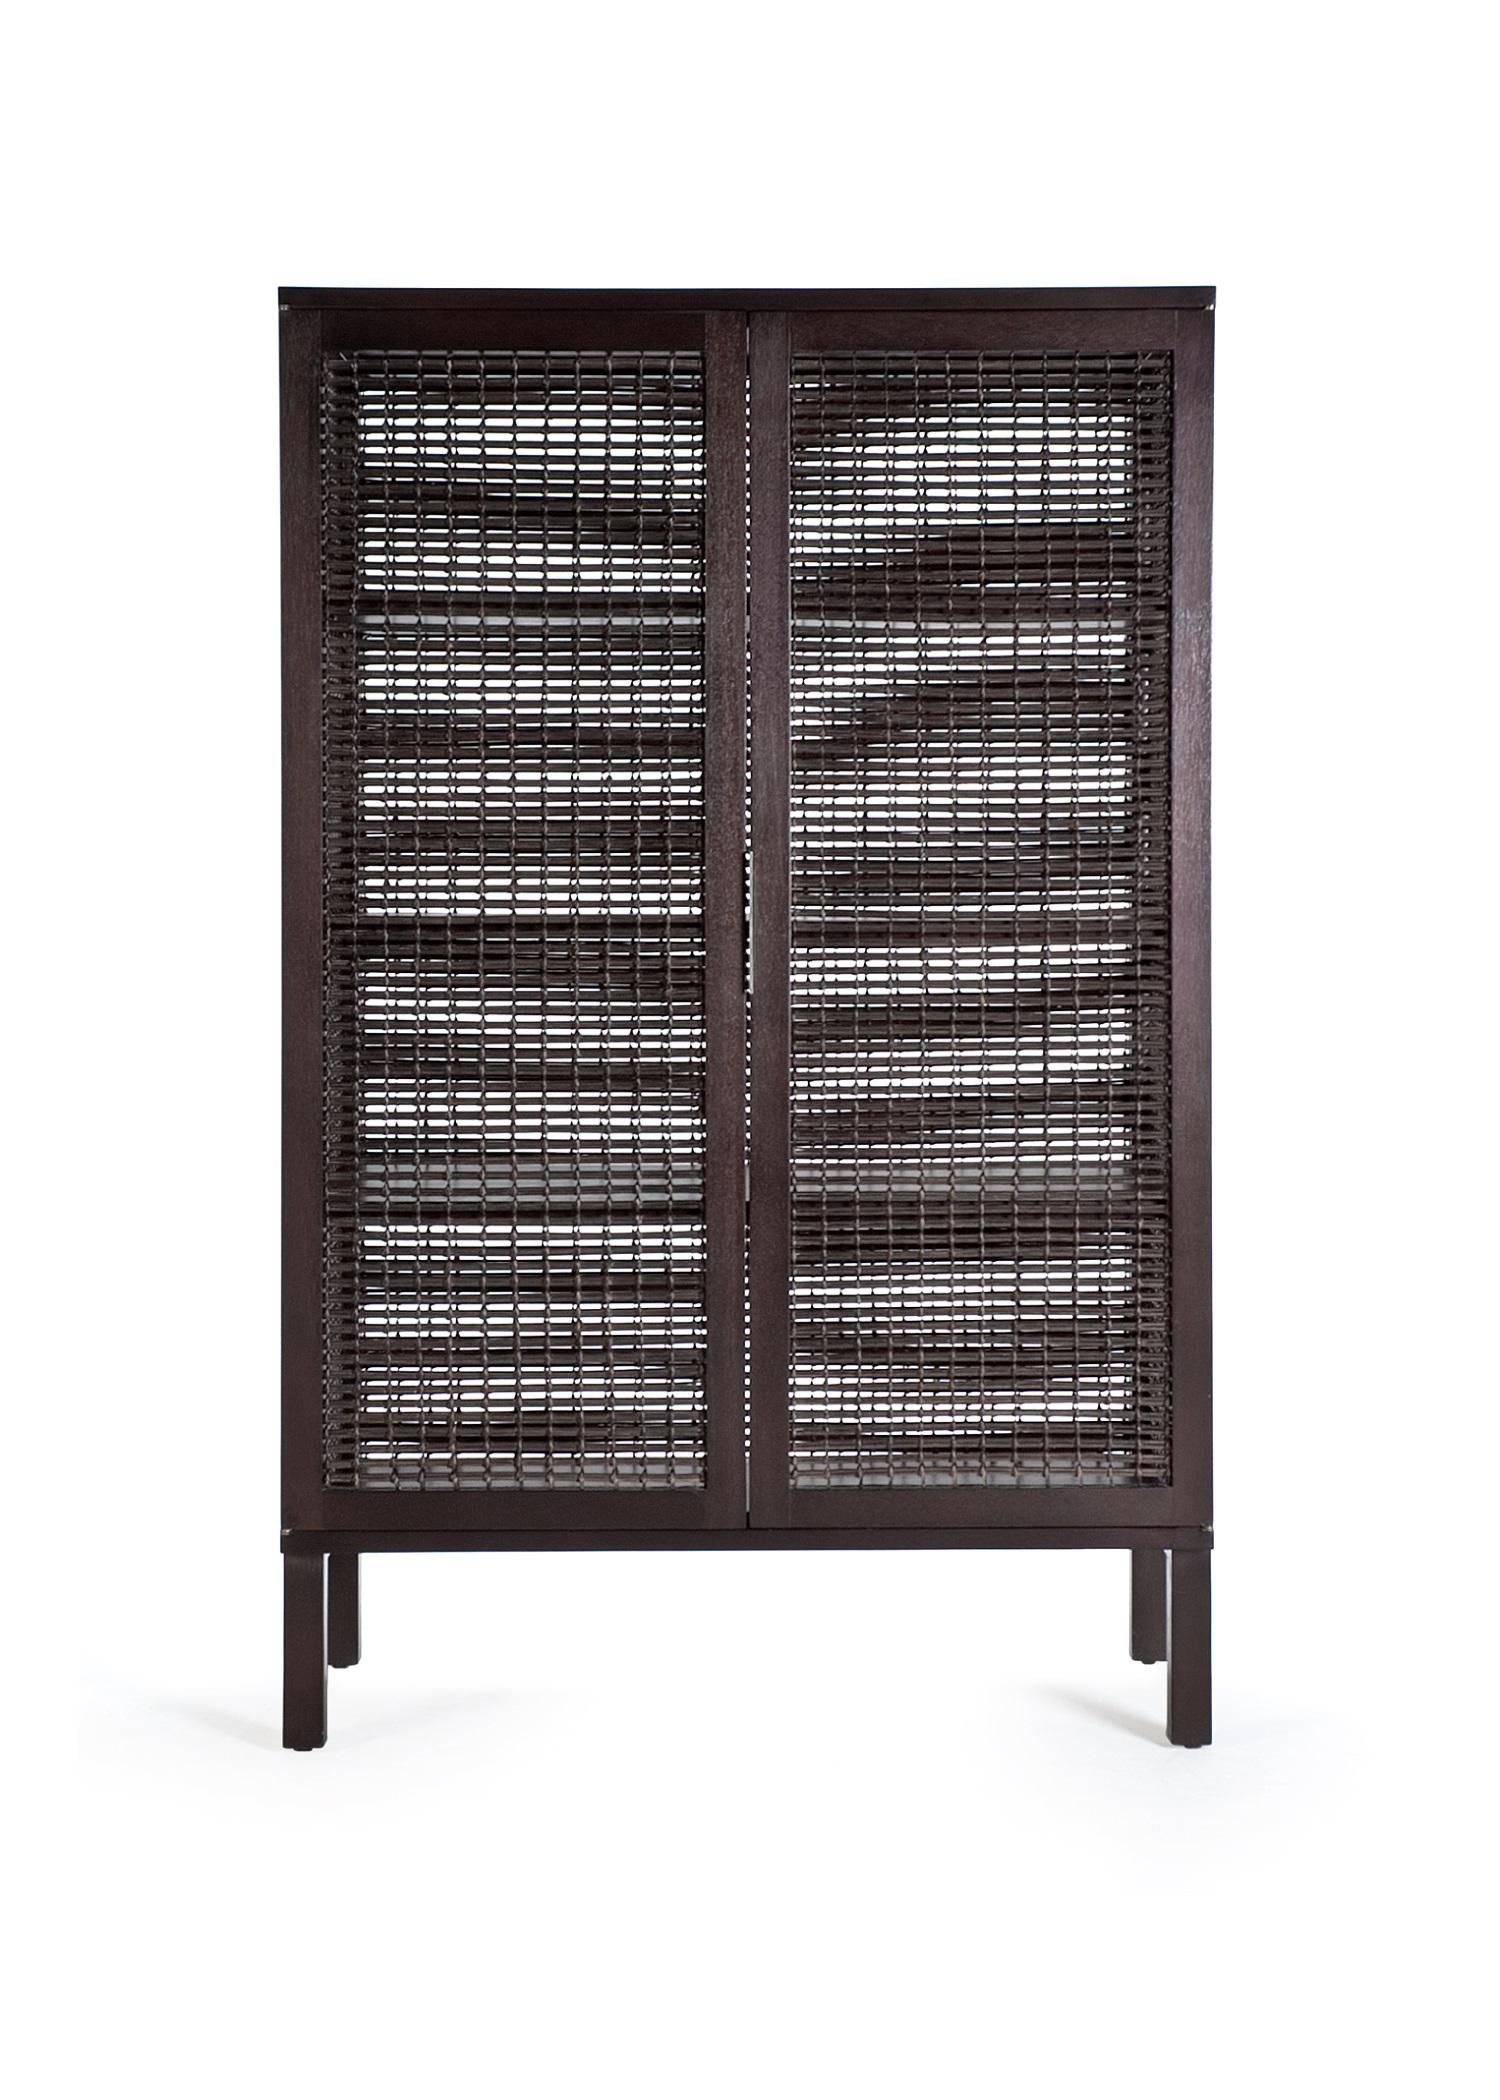 Maple suzy wong cabinet by Kenneth Cobonpue.
Materials: Abaca, rattan, maple. 
Also available in walnut.
Dimensions: 50 cm x 100 cm x H 160 cm

Woven panels create a feeling of intimacy as you and your guests indulge in conversation or tea. The